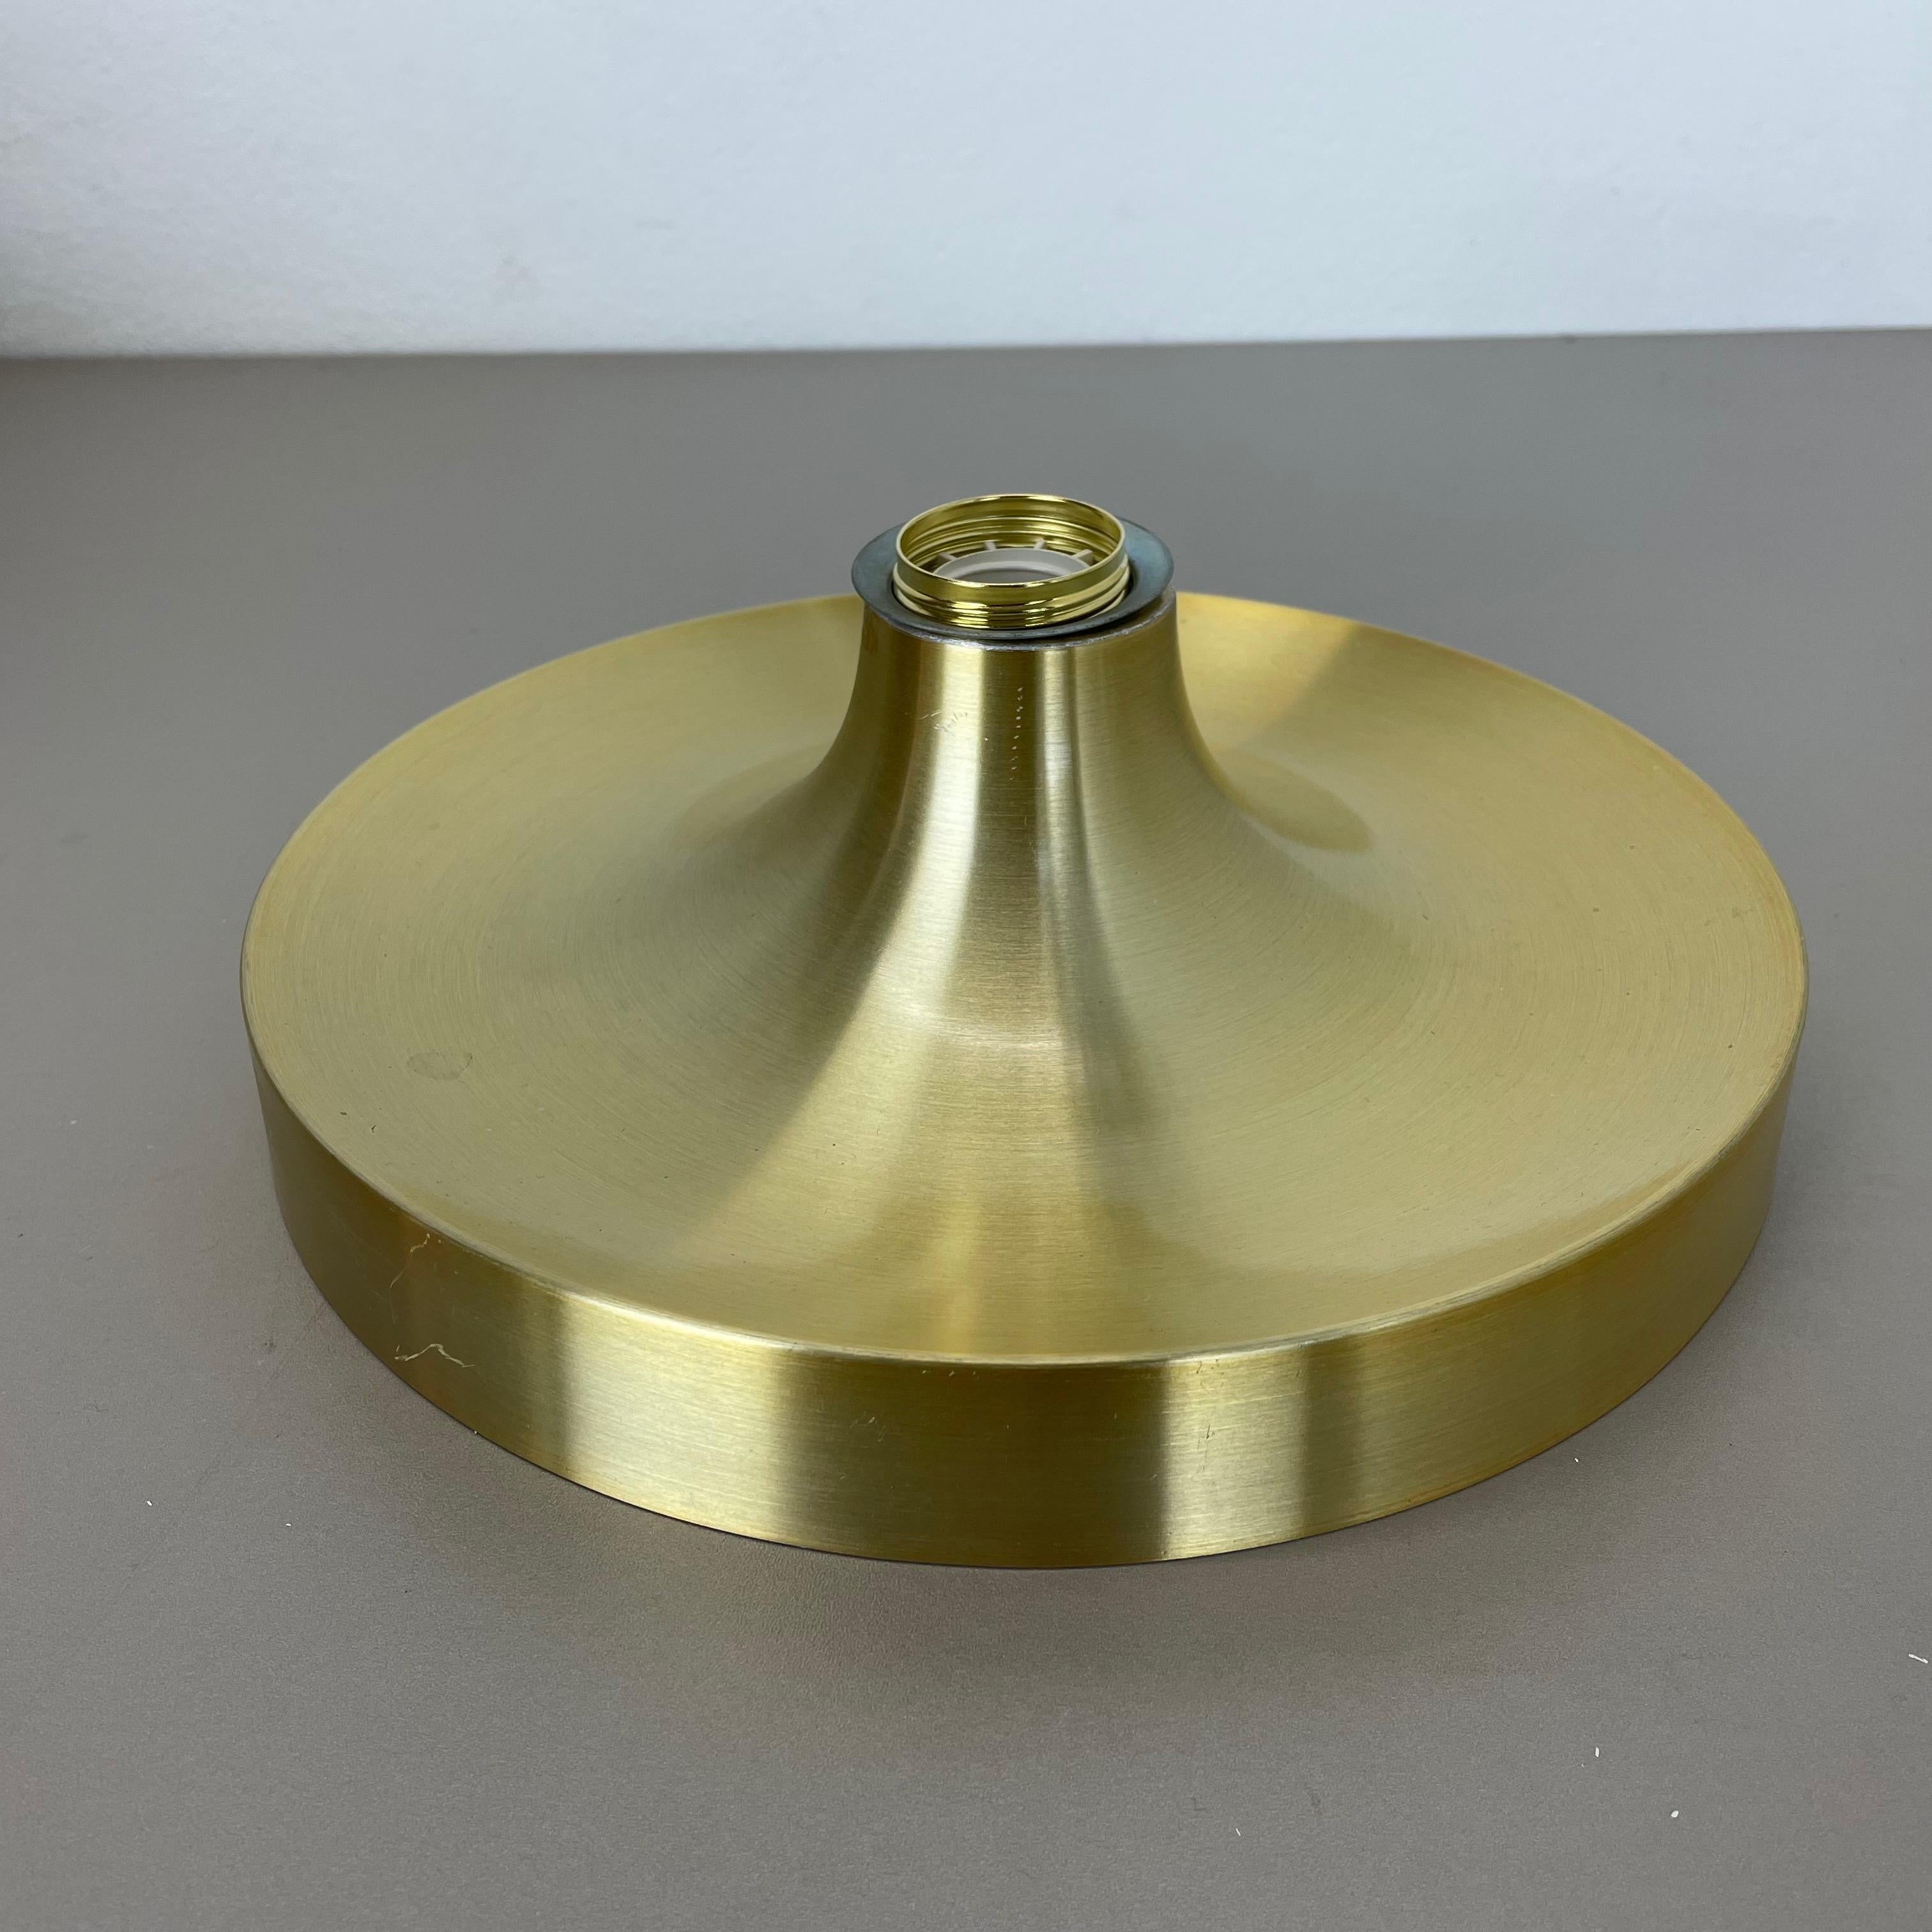 Rare Golden Charlotte Perriand Disc Wall Light by Honsel, Germany 1960s For Sale 1